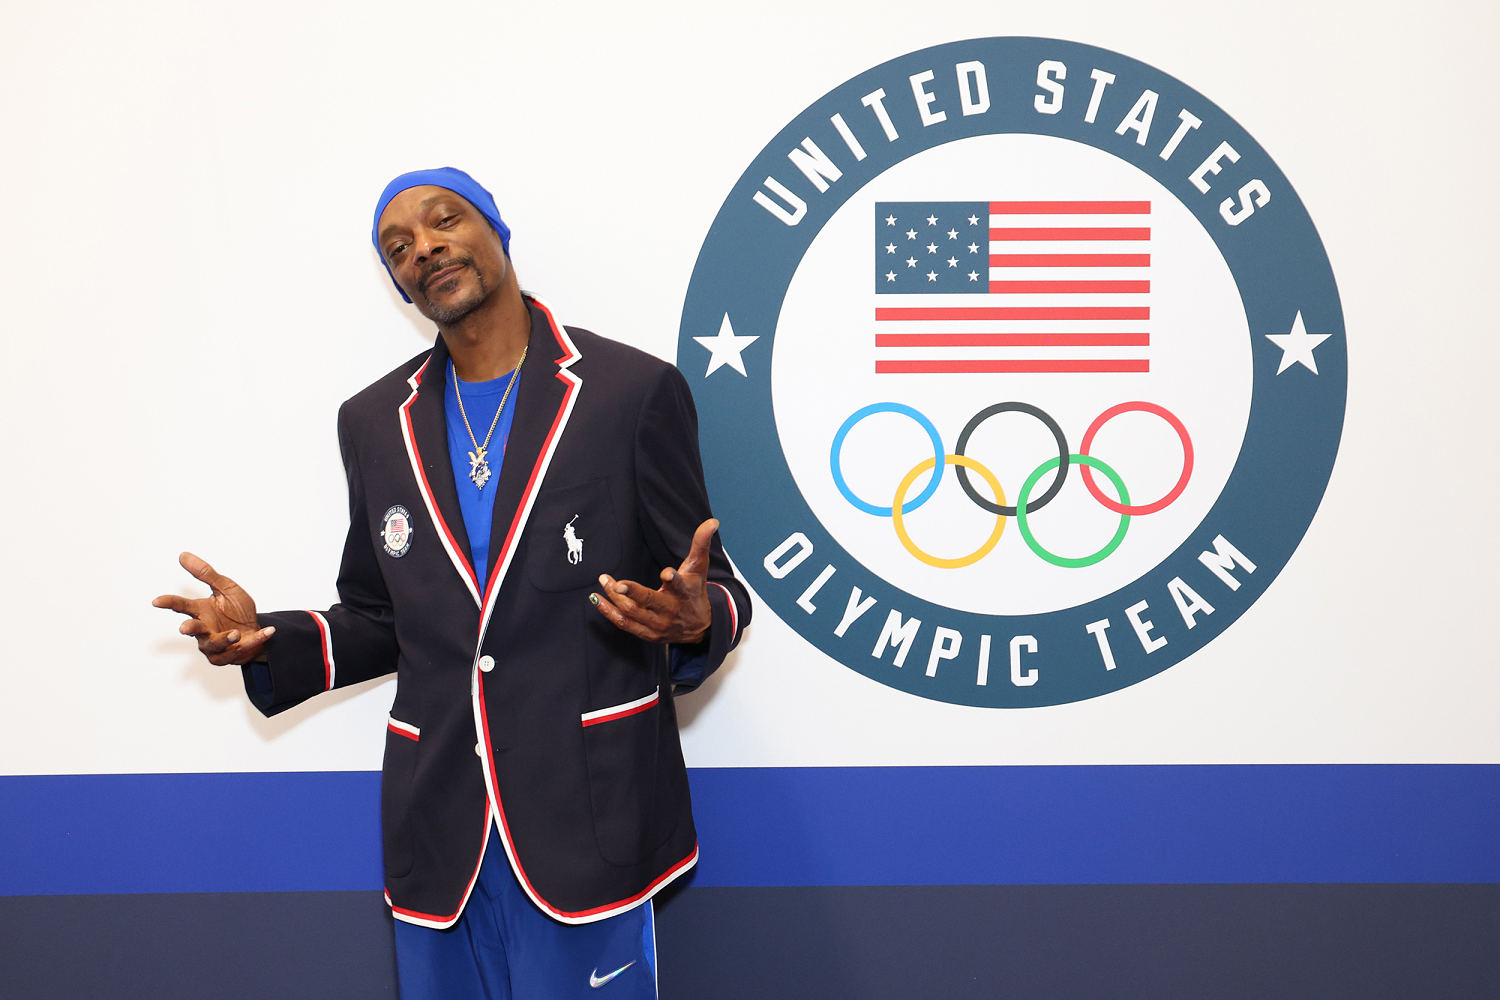 Snoop Dogg will carry the Olympic torch on its final leg to Paris